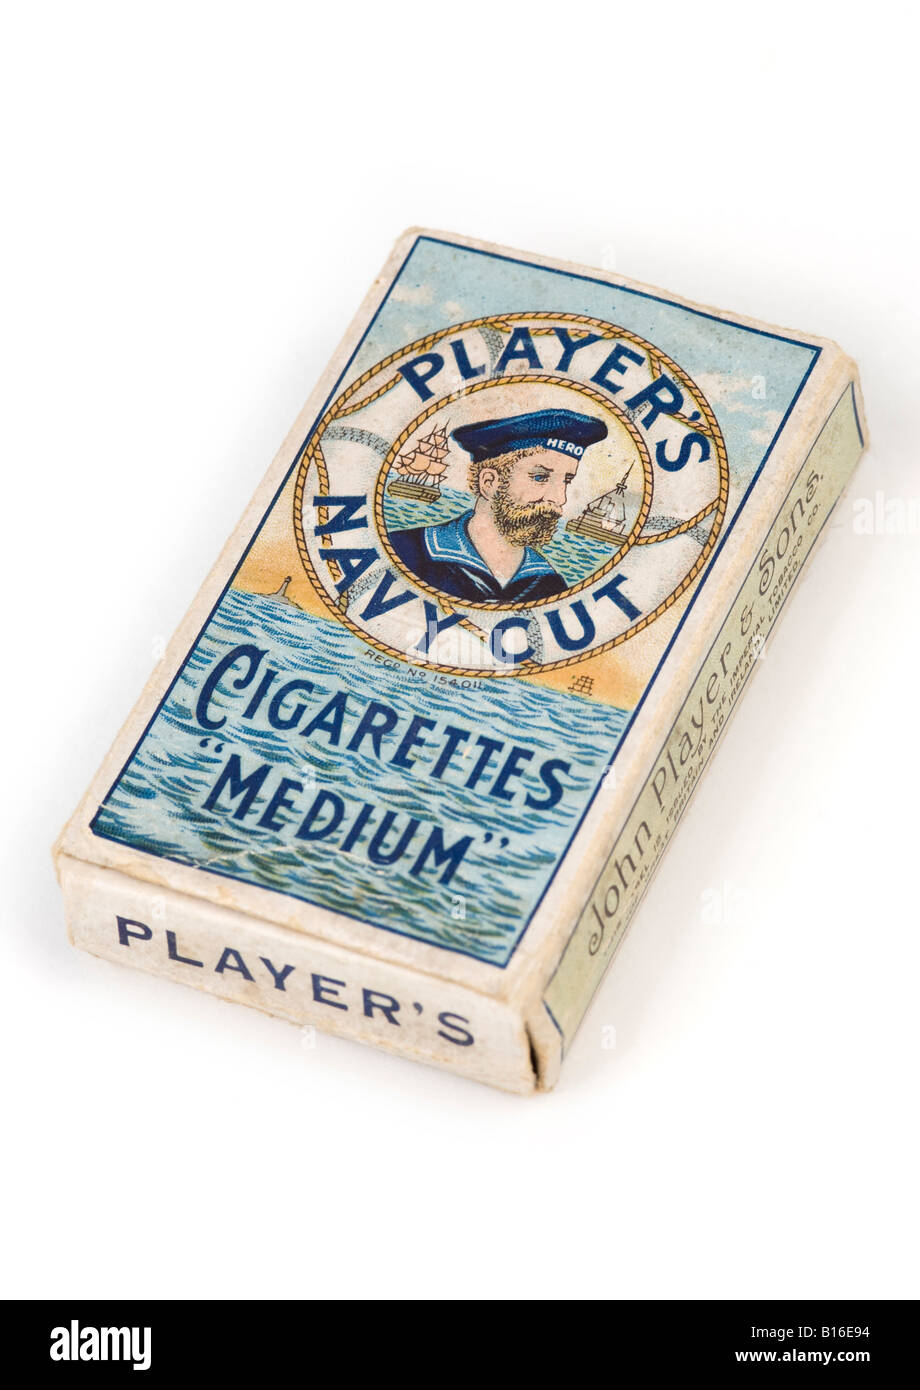 Players Navy Cut cigarettes Stock Photo